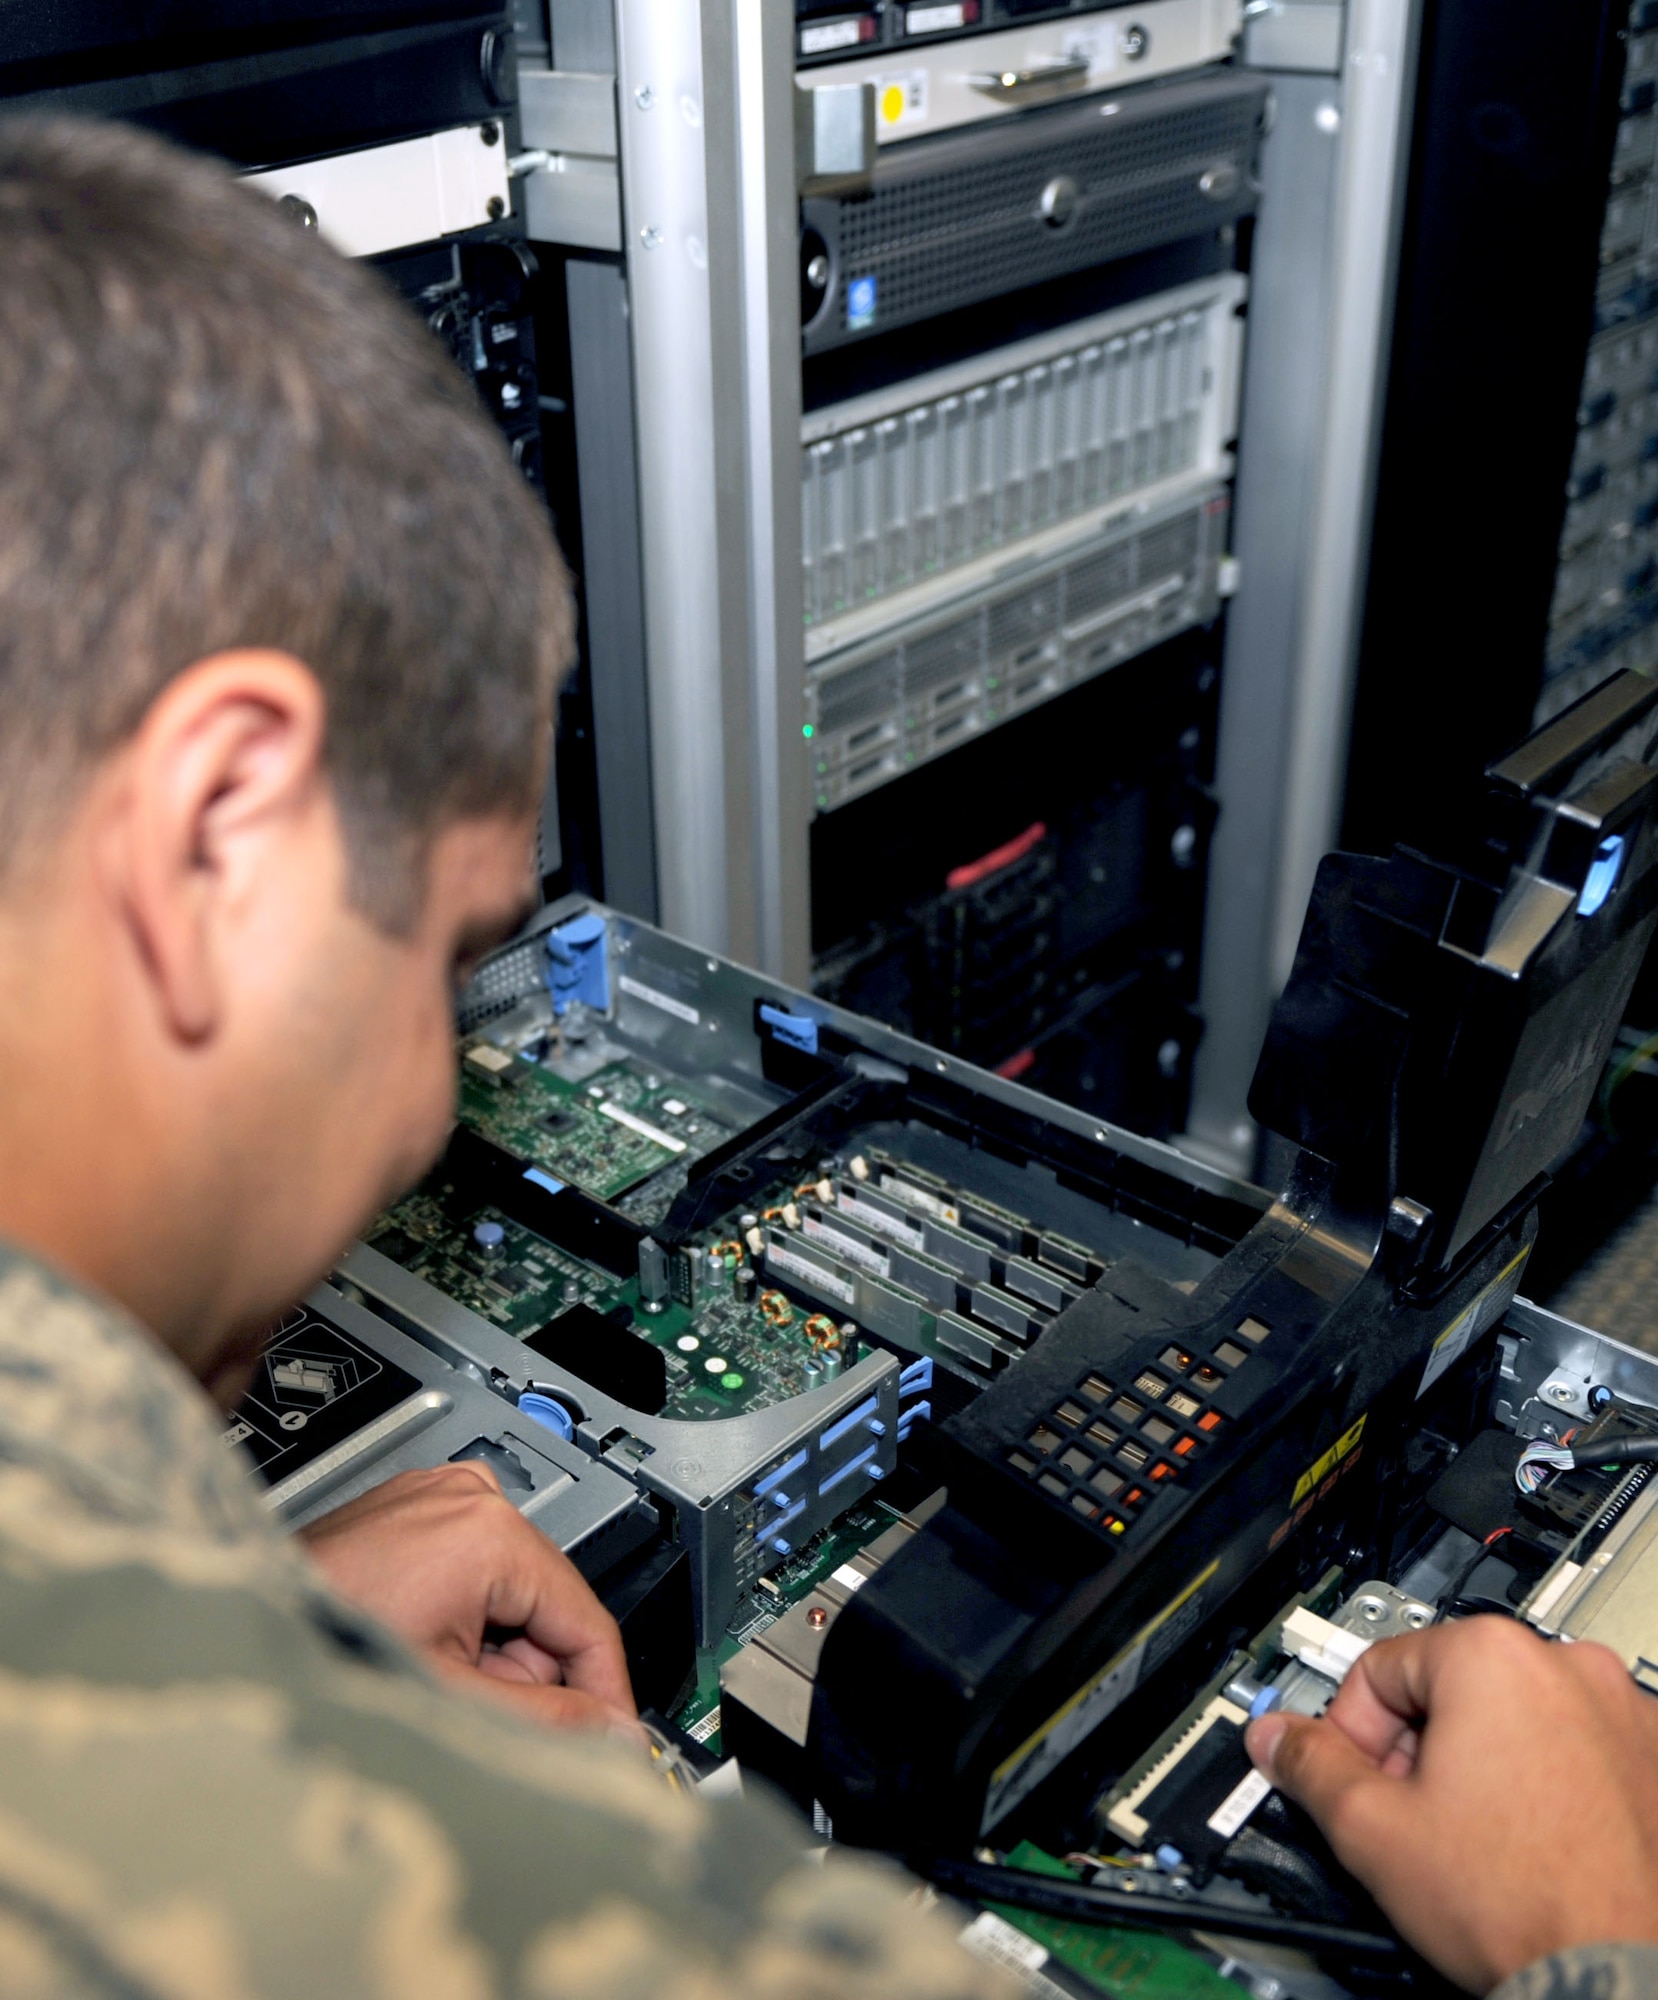 U.S. Air Force Airman 1st Class Steven Iguado, 612th Air Communications Maintenance Squadron communications control administrator, performs maintenance on a server on Davis-Monthan Air Force Base, Ariz., Nov. 1, 2012. The 612th ACOMS performs routine checks of their system every day. (U.S. Air Force photo by Airman 1st Class Saphfire Cook/Released)